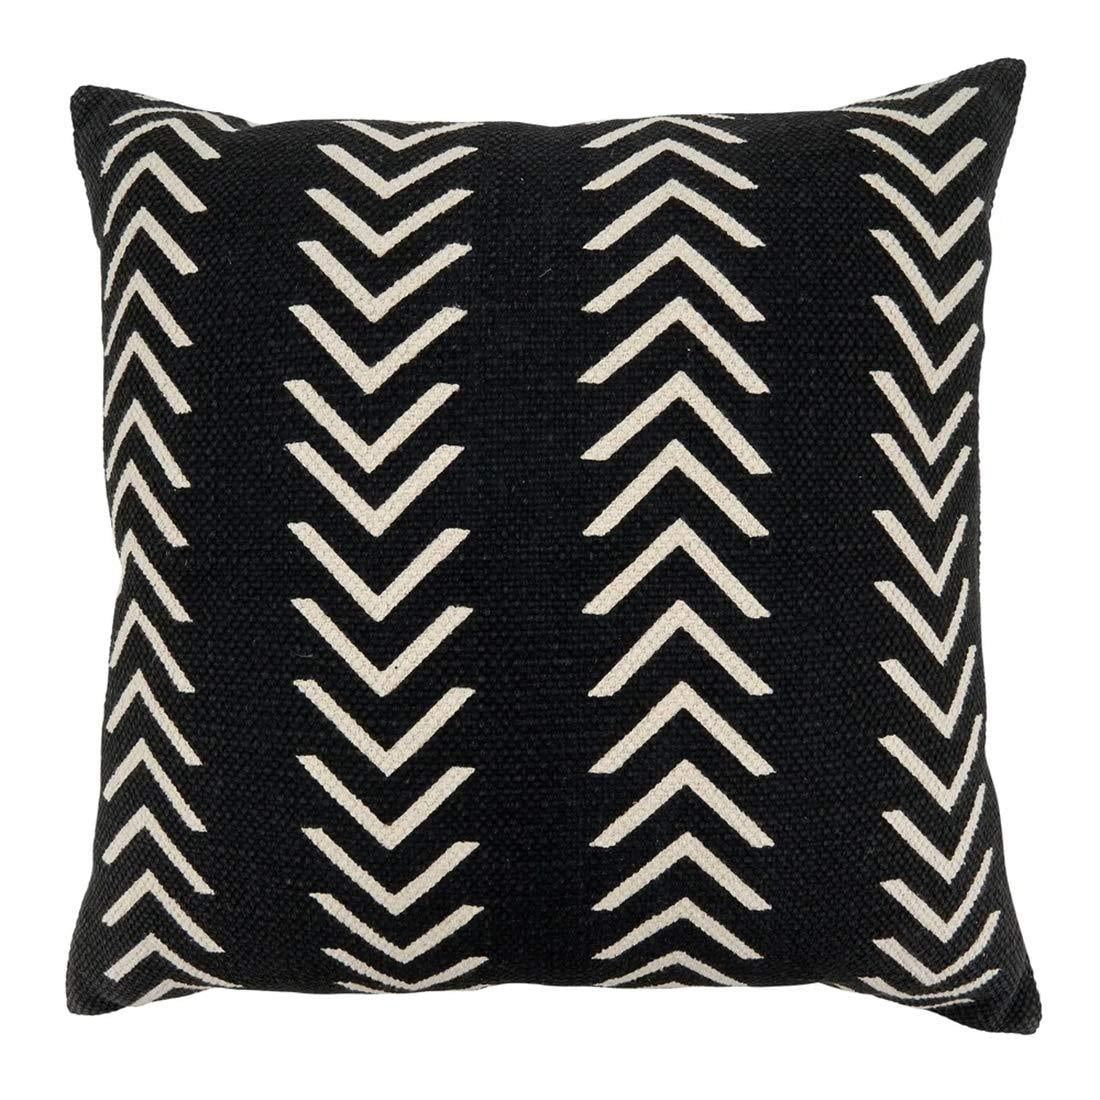 22 x 22 throw pillow covers